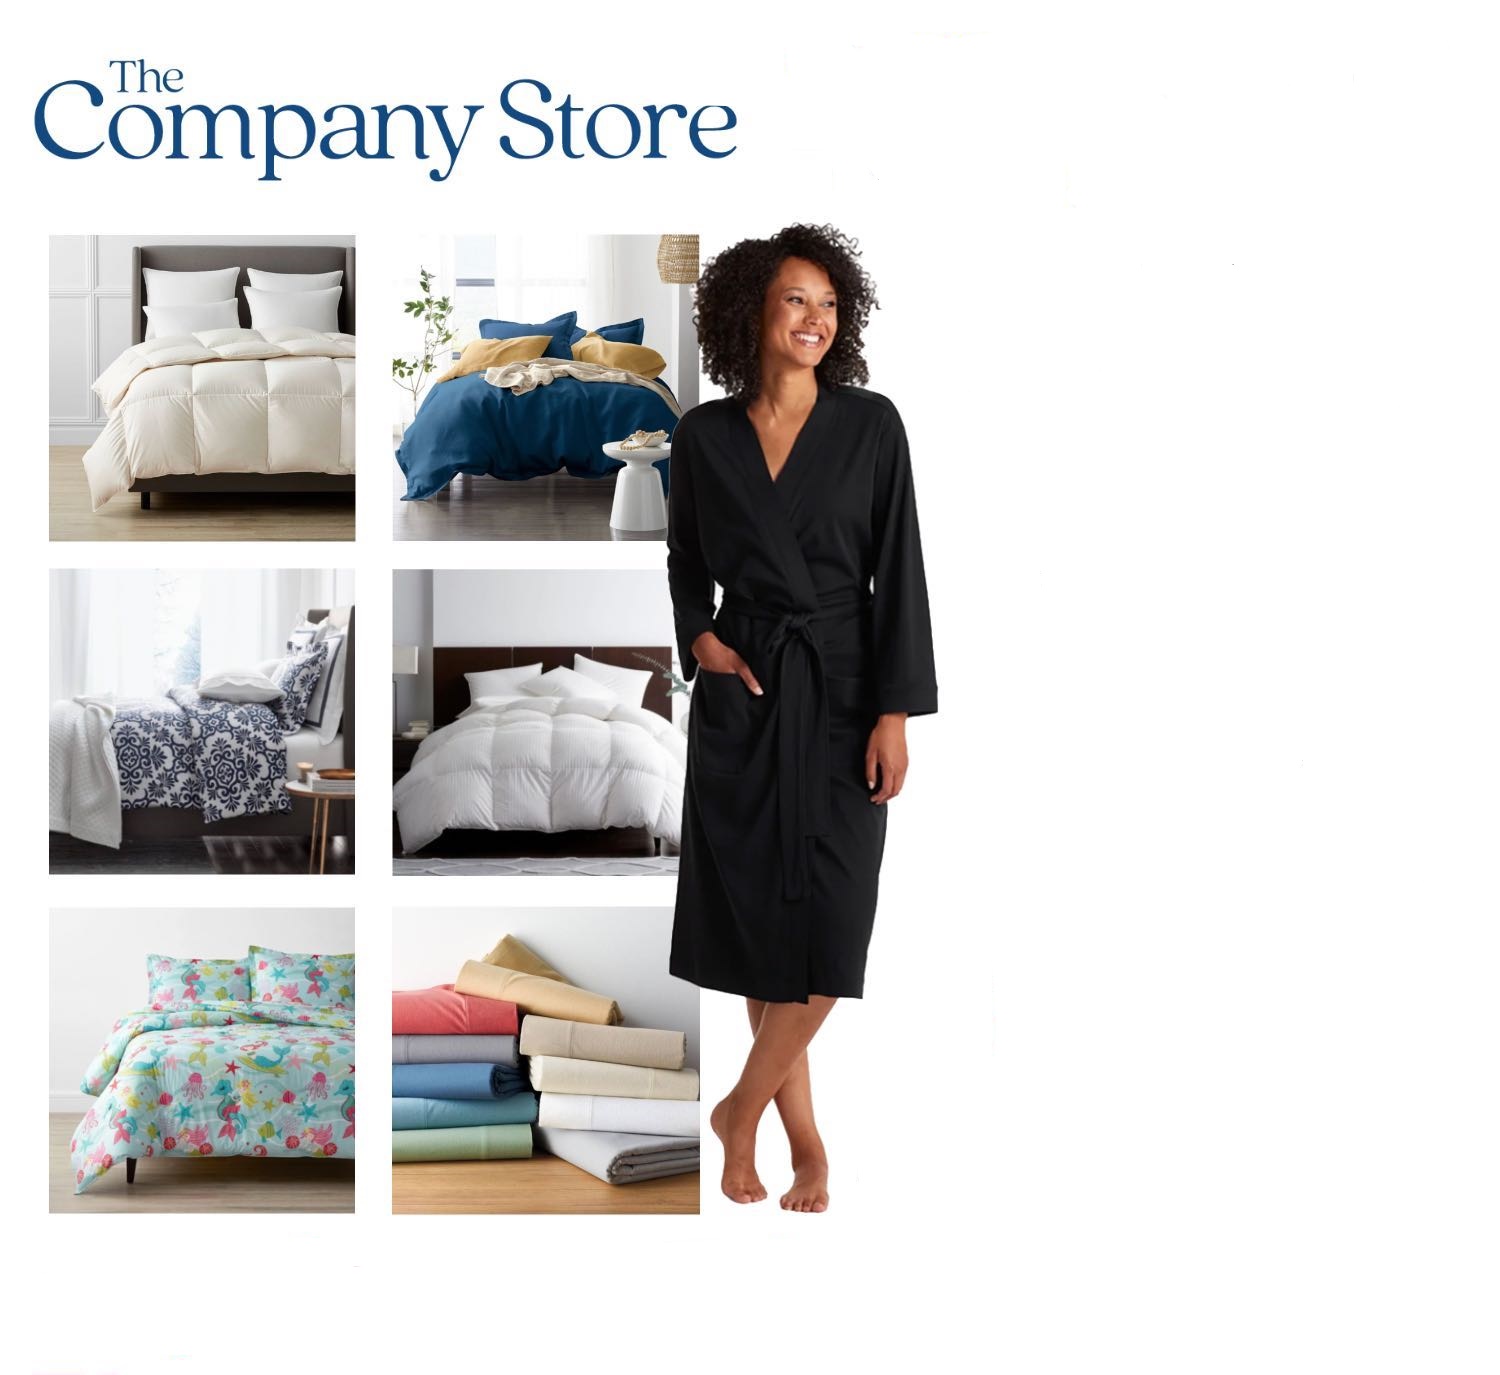 49584 - THE COMPANY STORE OFFER OF LINENS & MORE USA